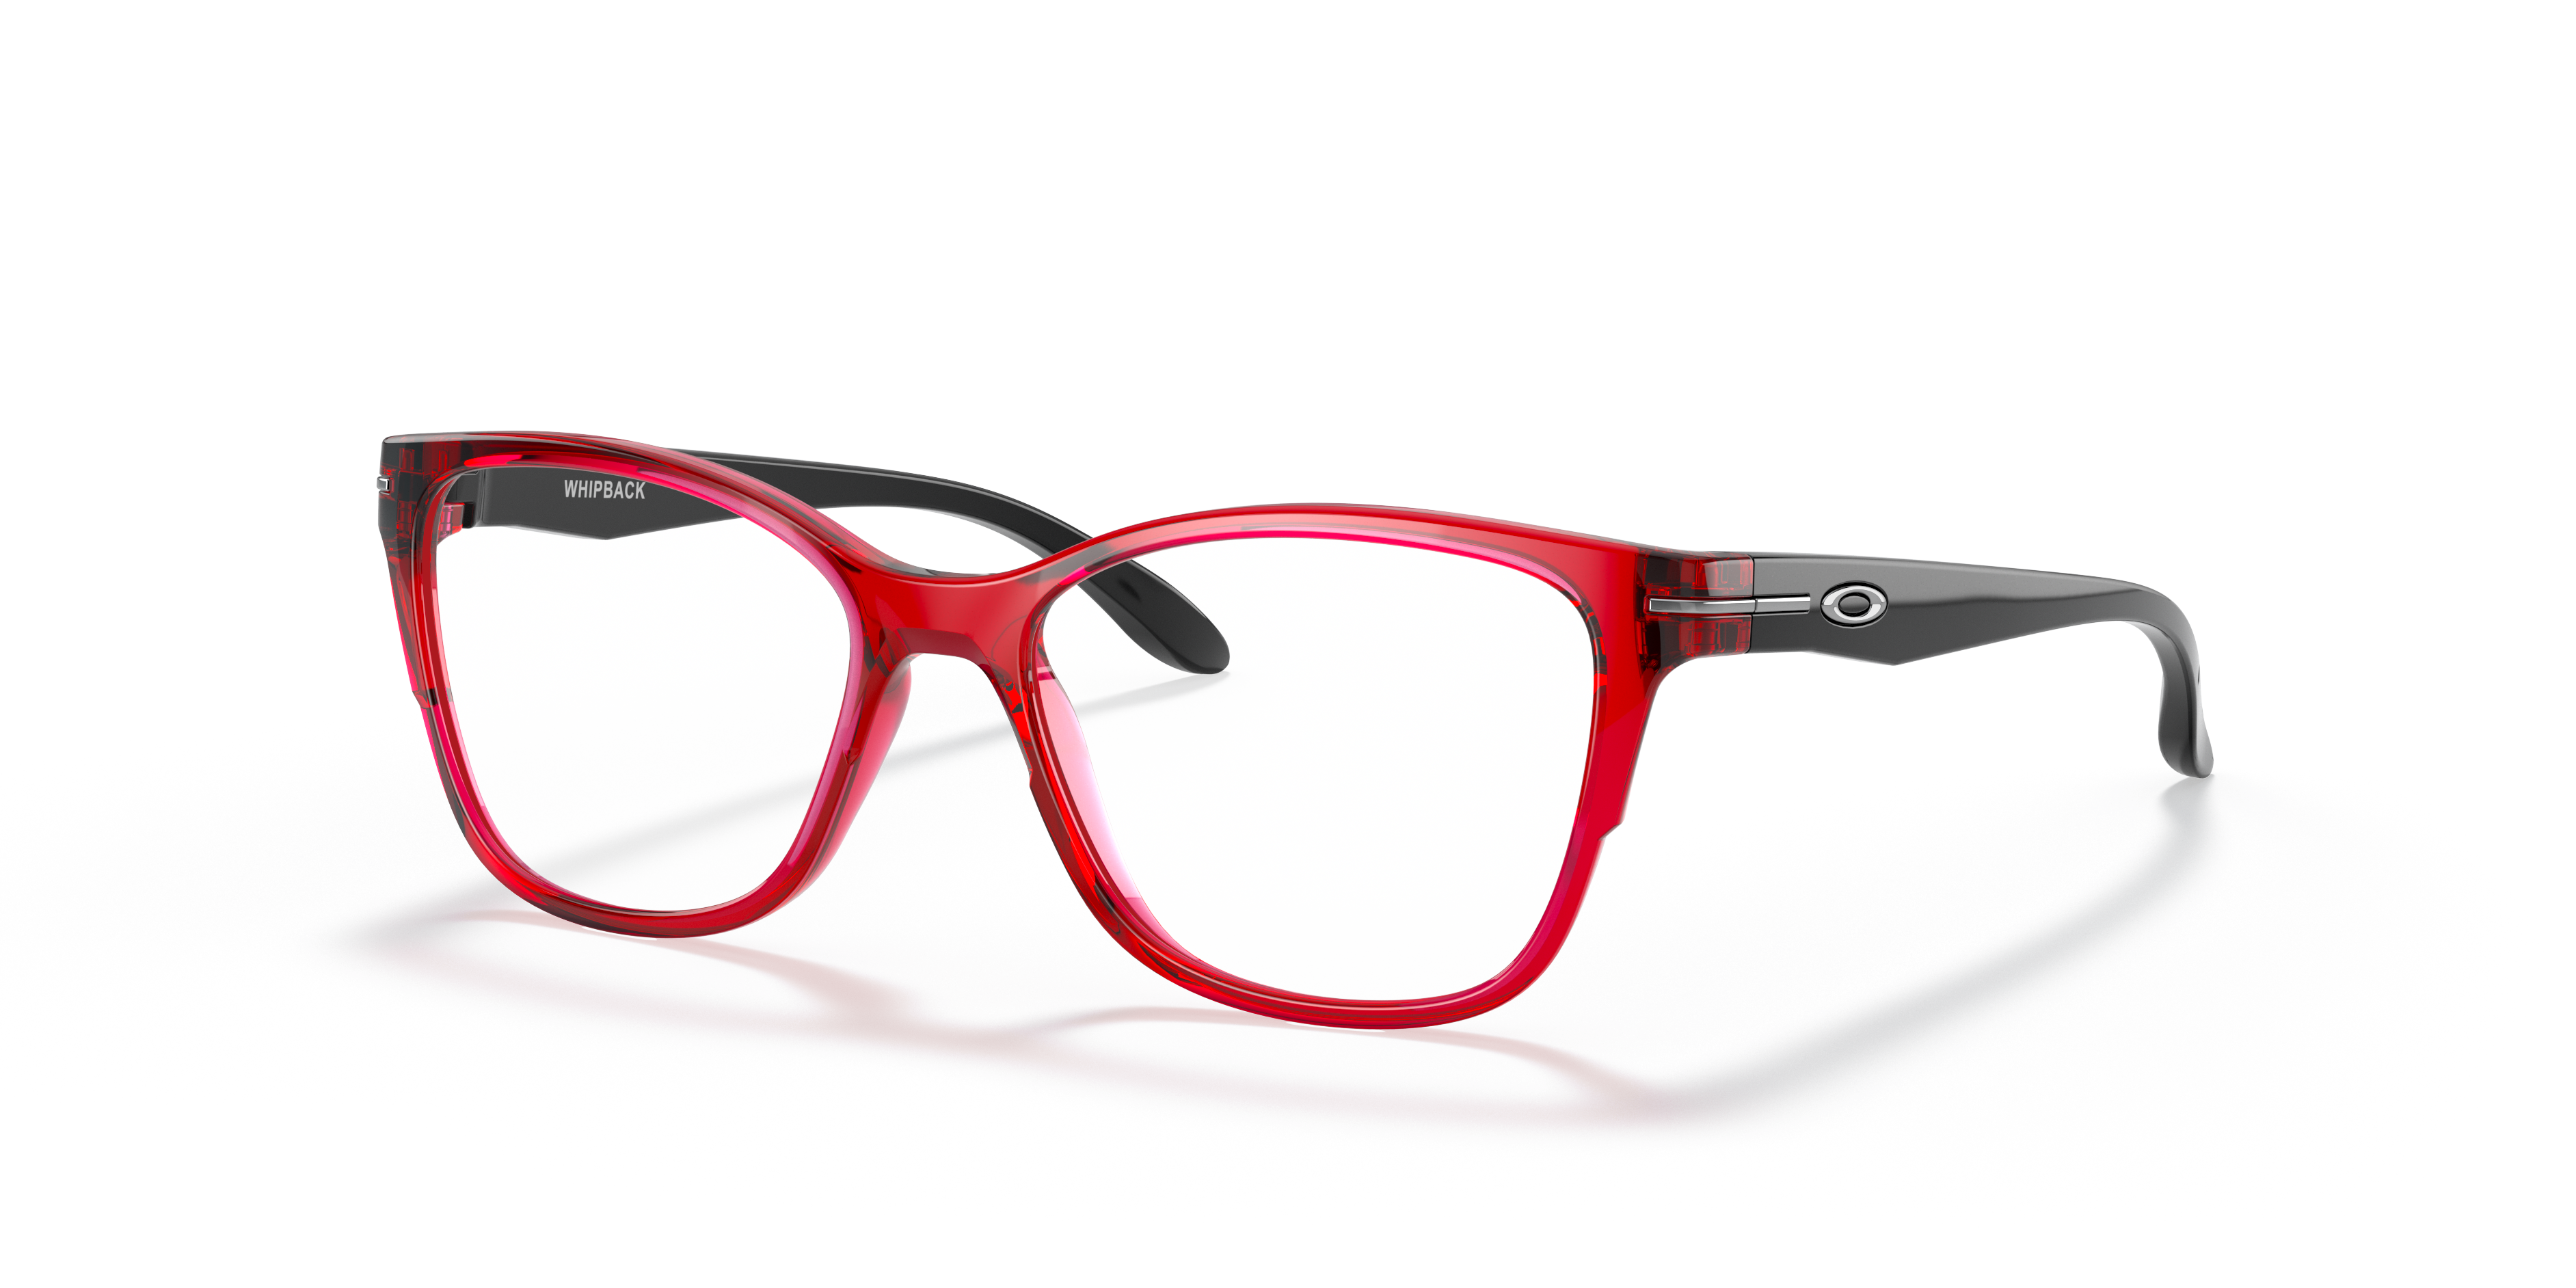 Oakley Whipback (youth Fit) In Red